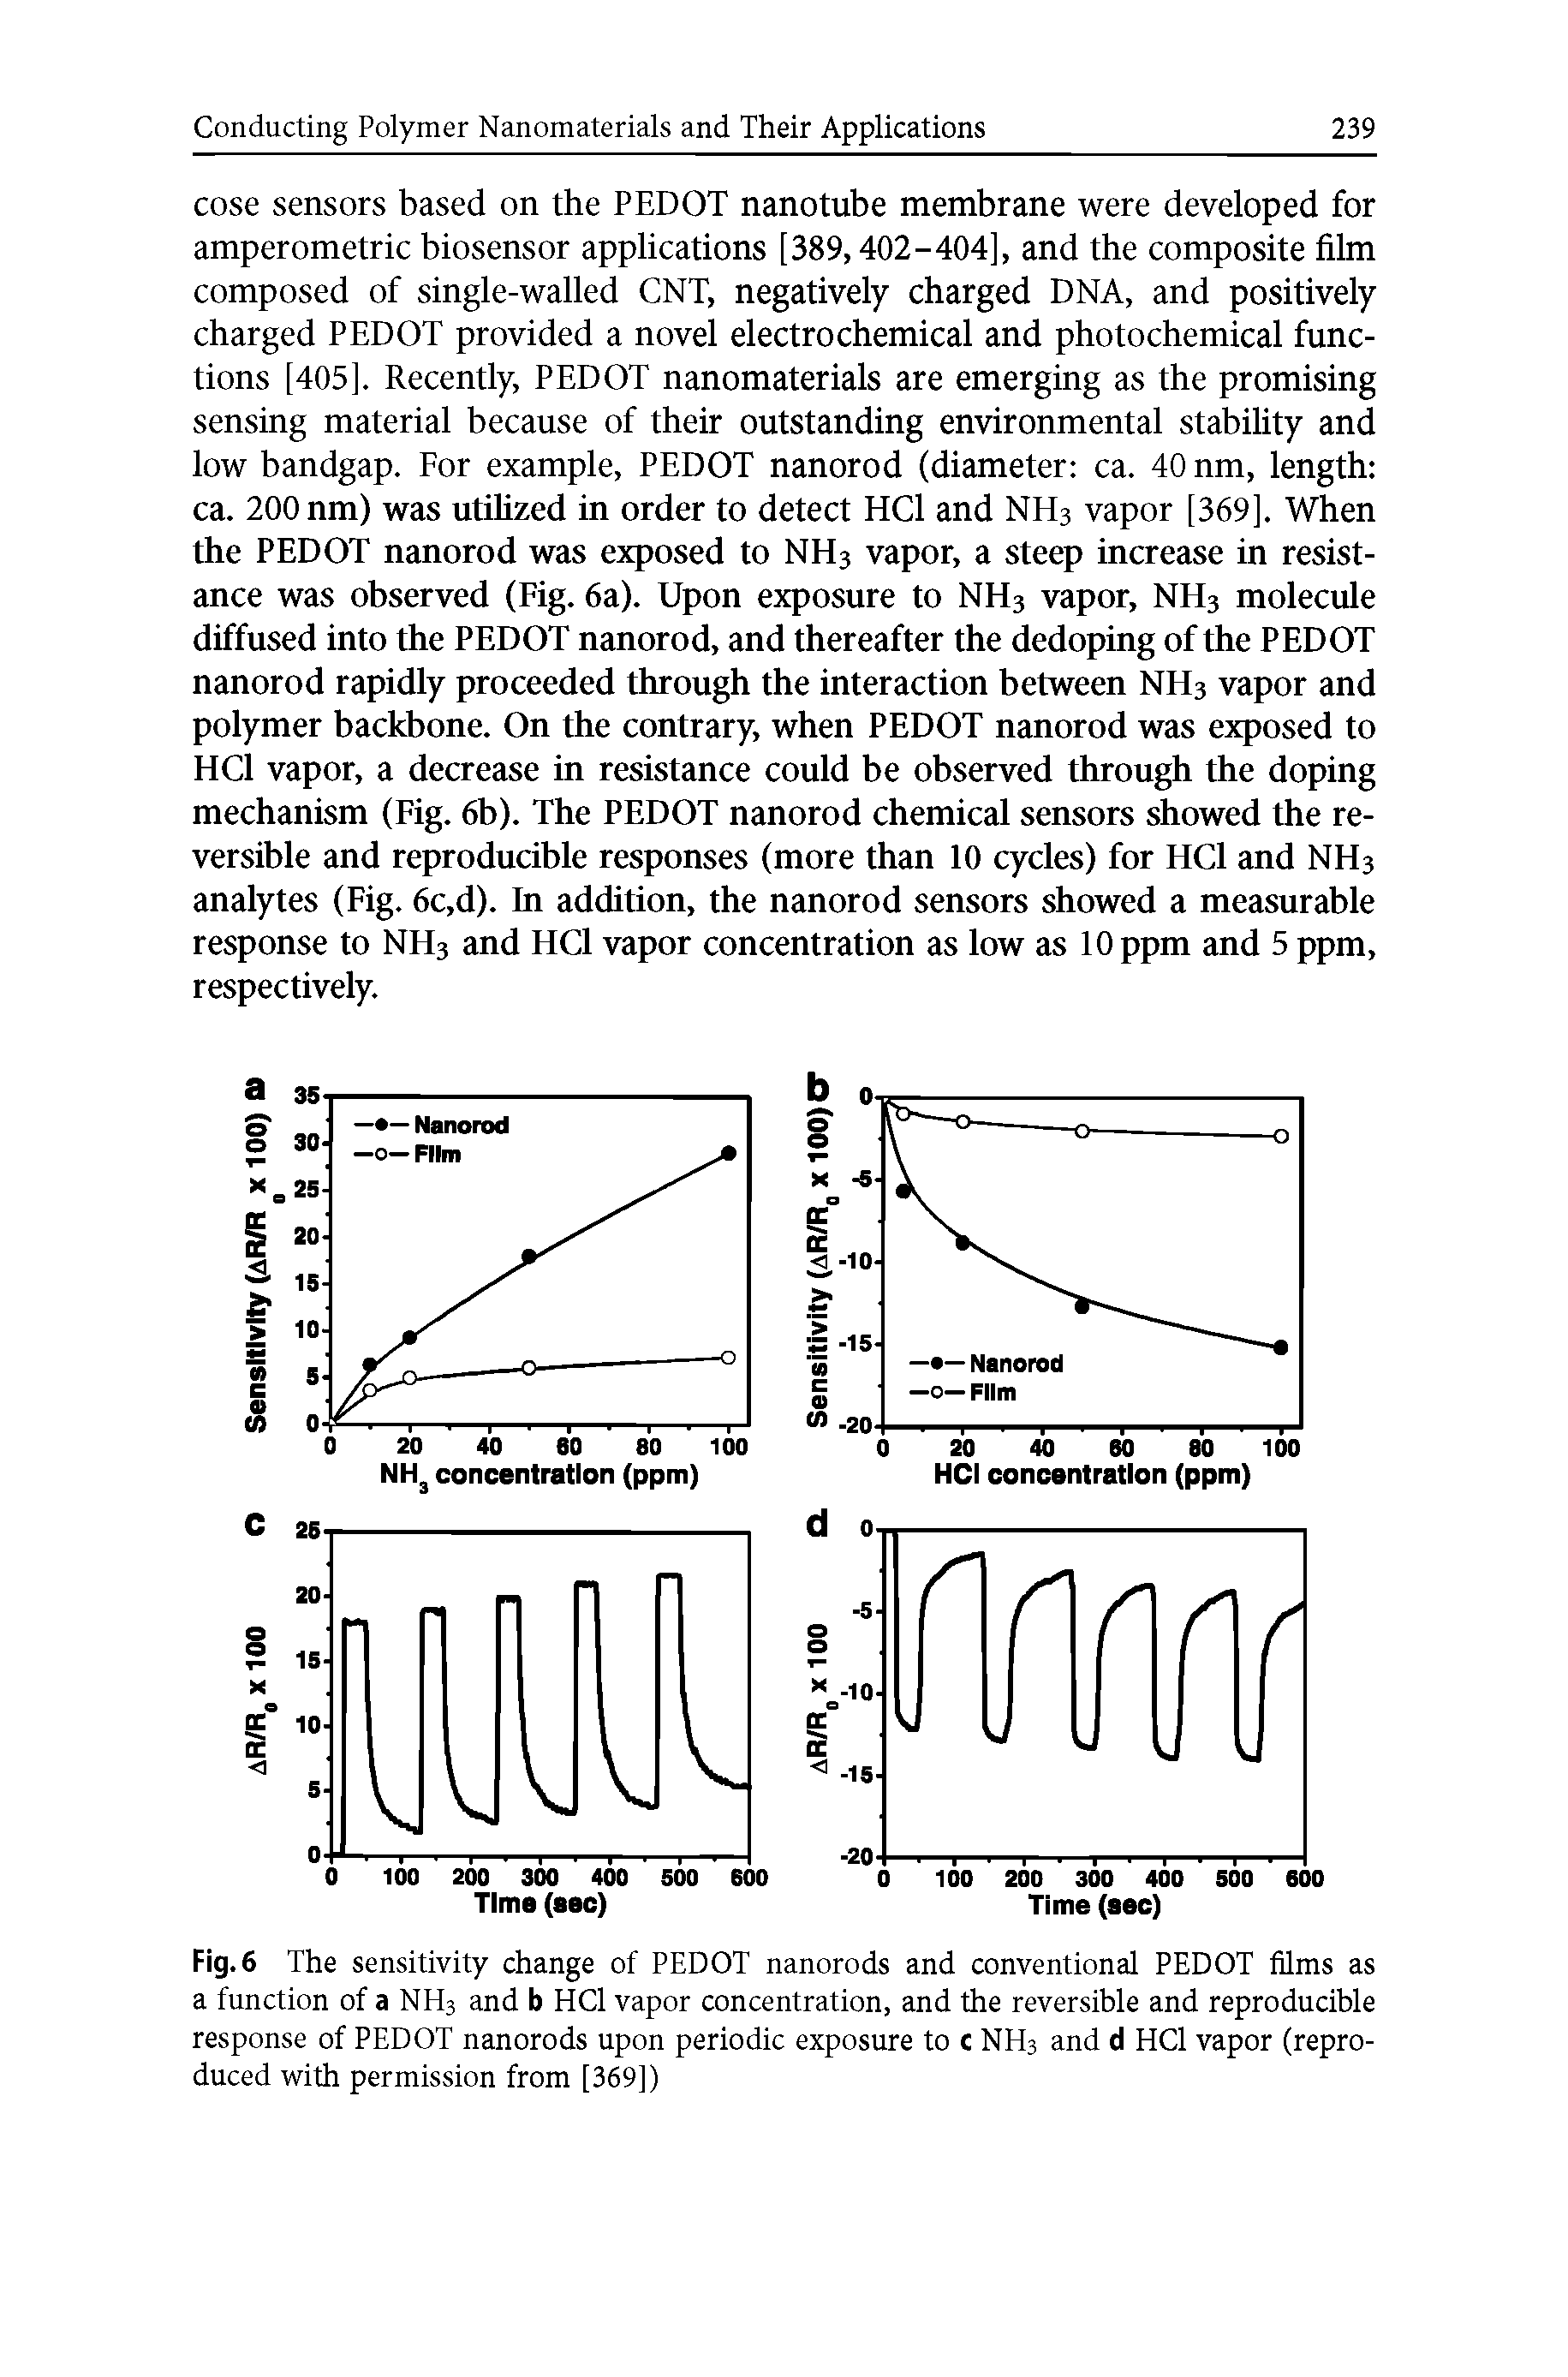 Fig. 6 The sensitivity change of PEDOT nanorods and conventional PEDOT films as a function of a NH3 and b HCl vapor concentration, and the reversible and reproducible response of PEDOT nanorods upon periodic exposure to c NH3 and d HCl vapor (reproduced with permission from [369])...